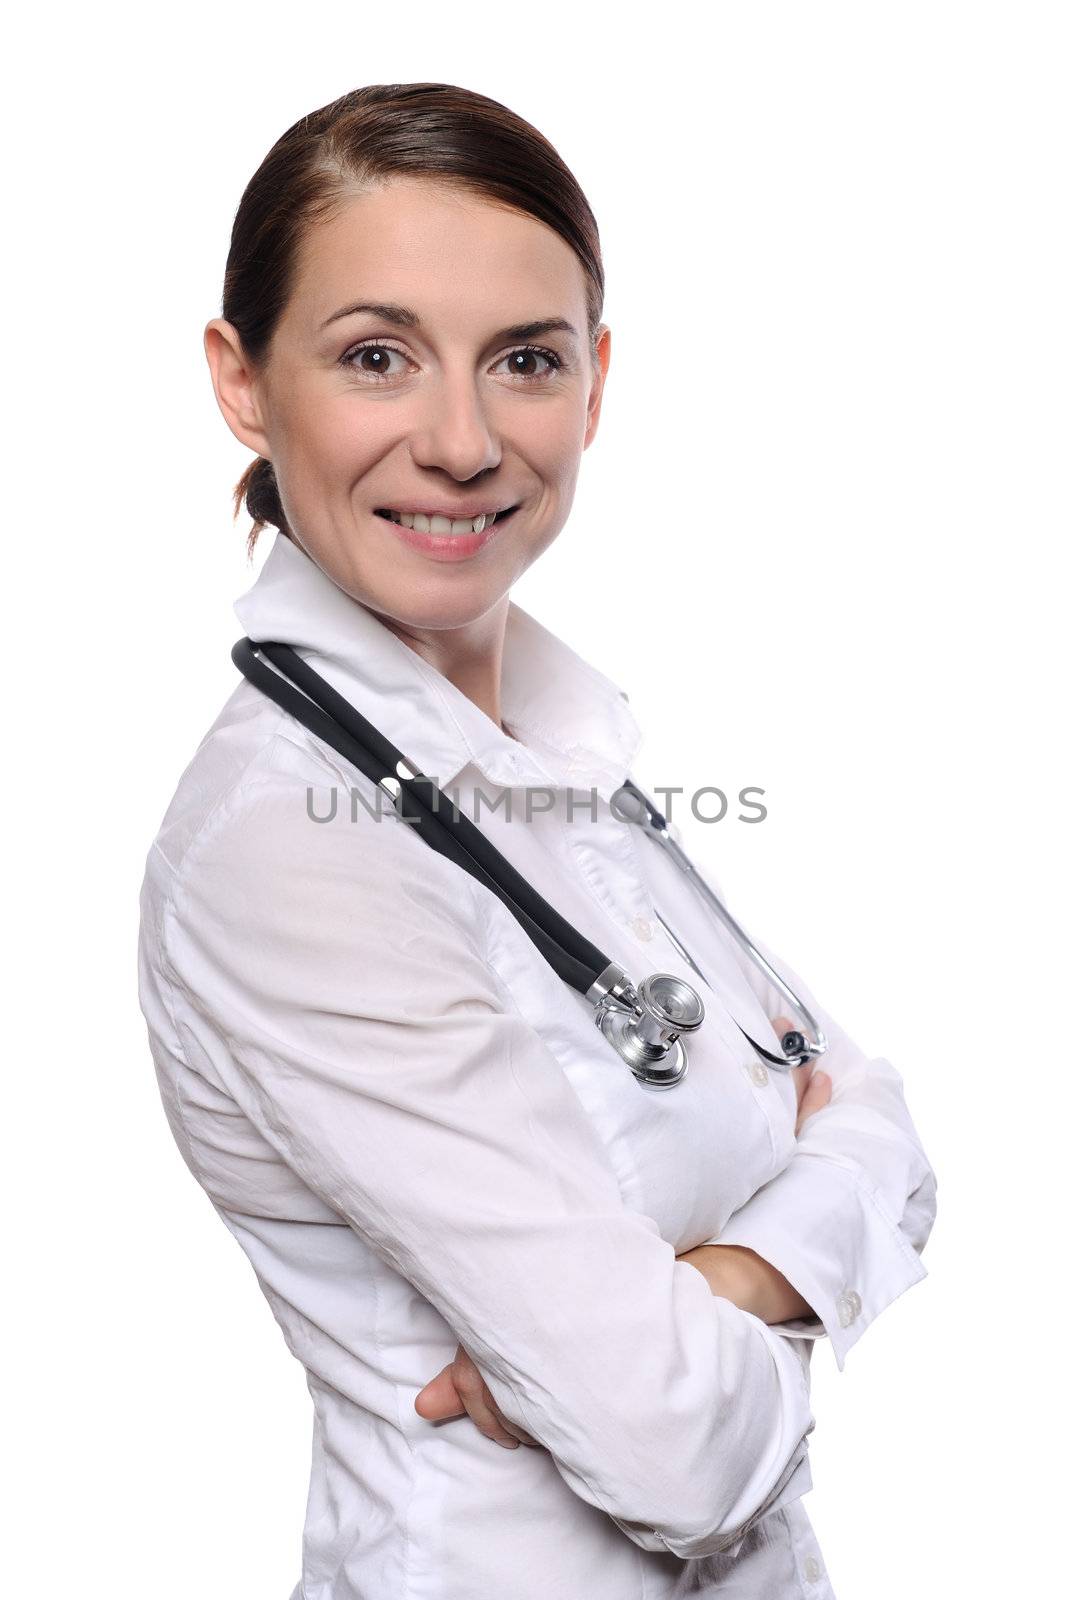 Female doctor with a stethoscope by kirs-ua